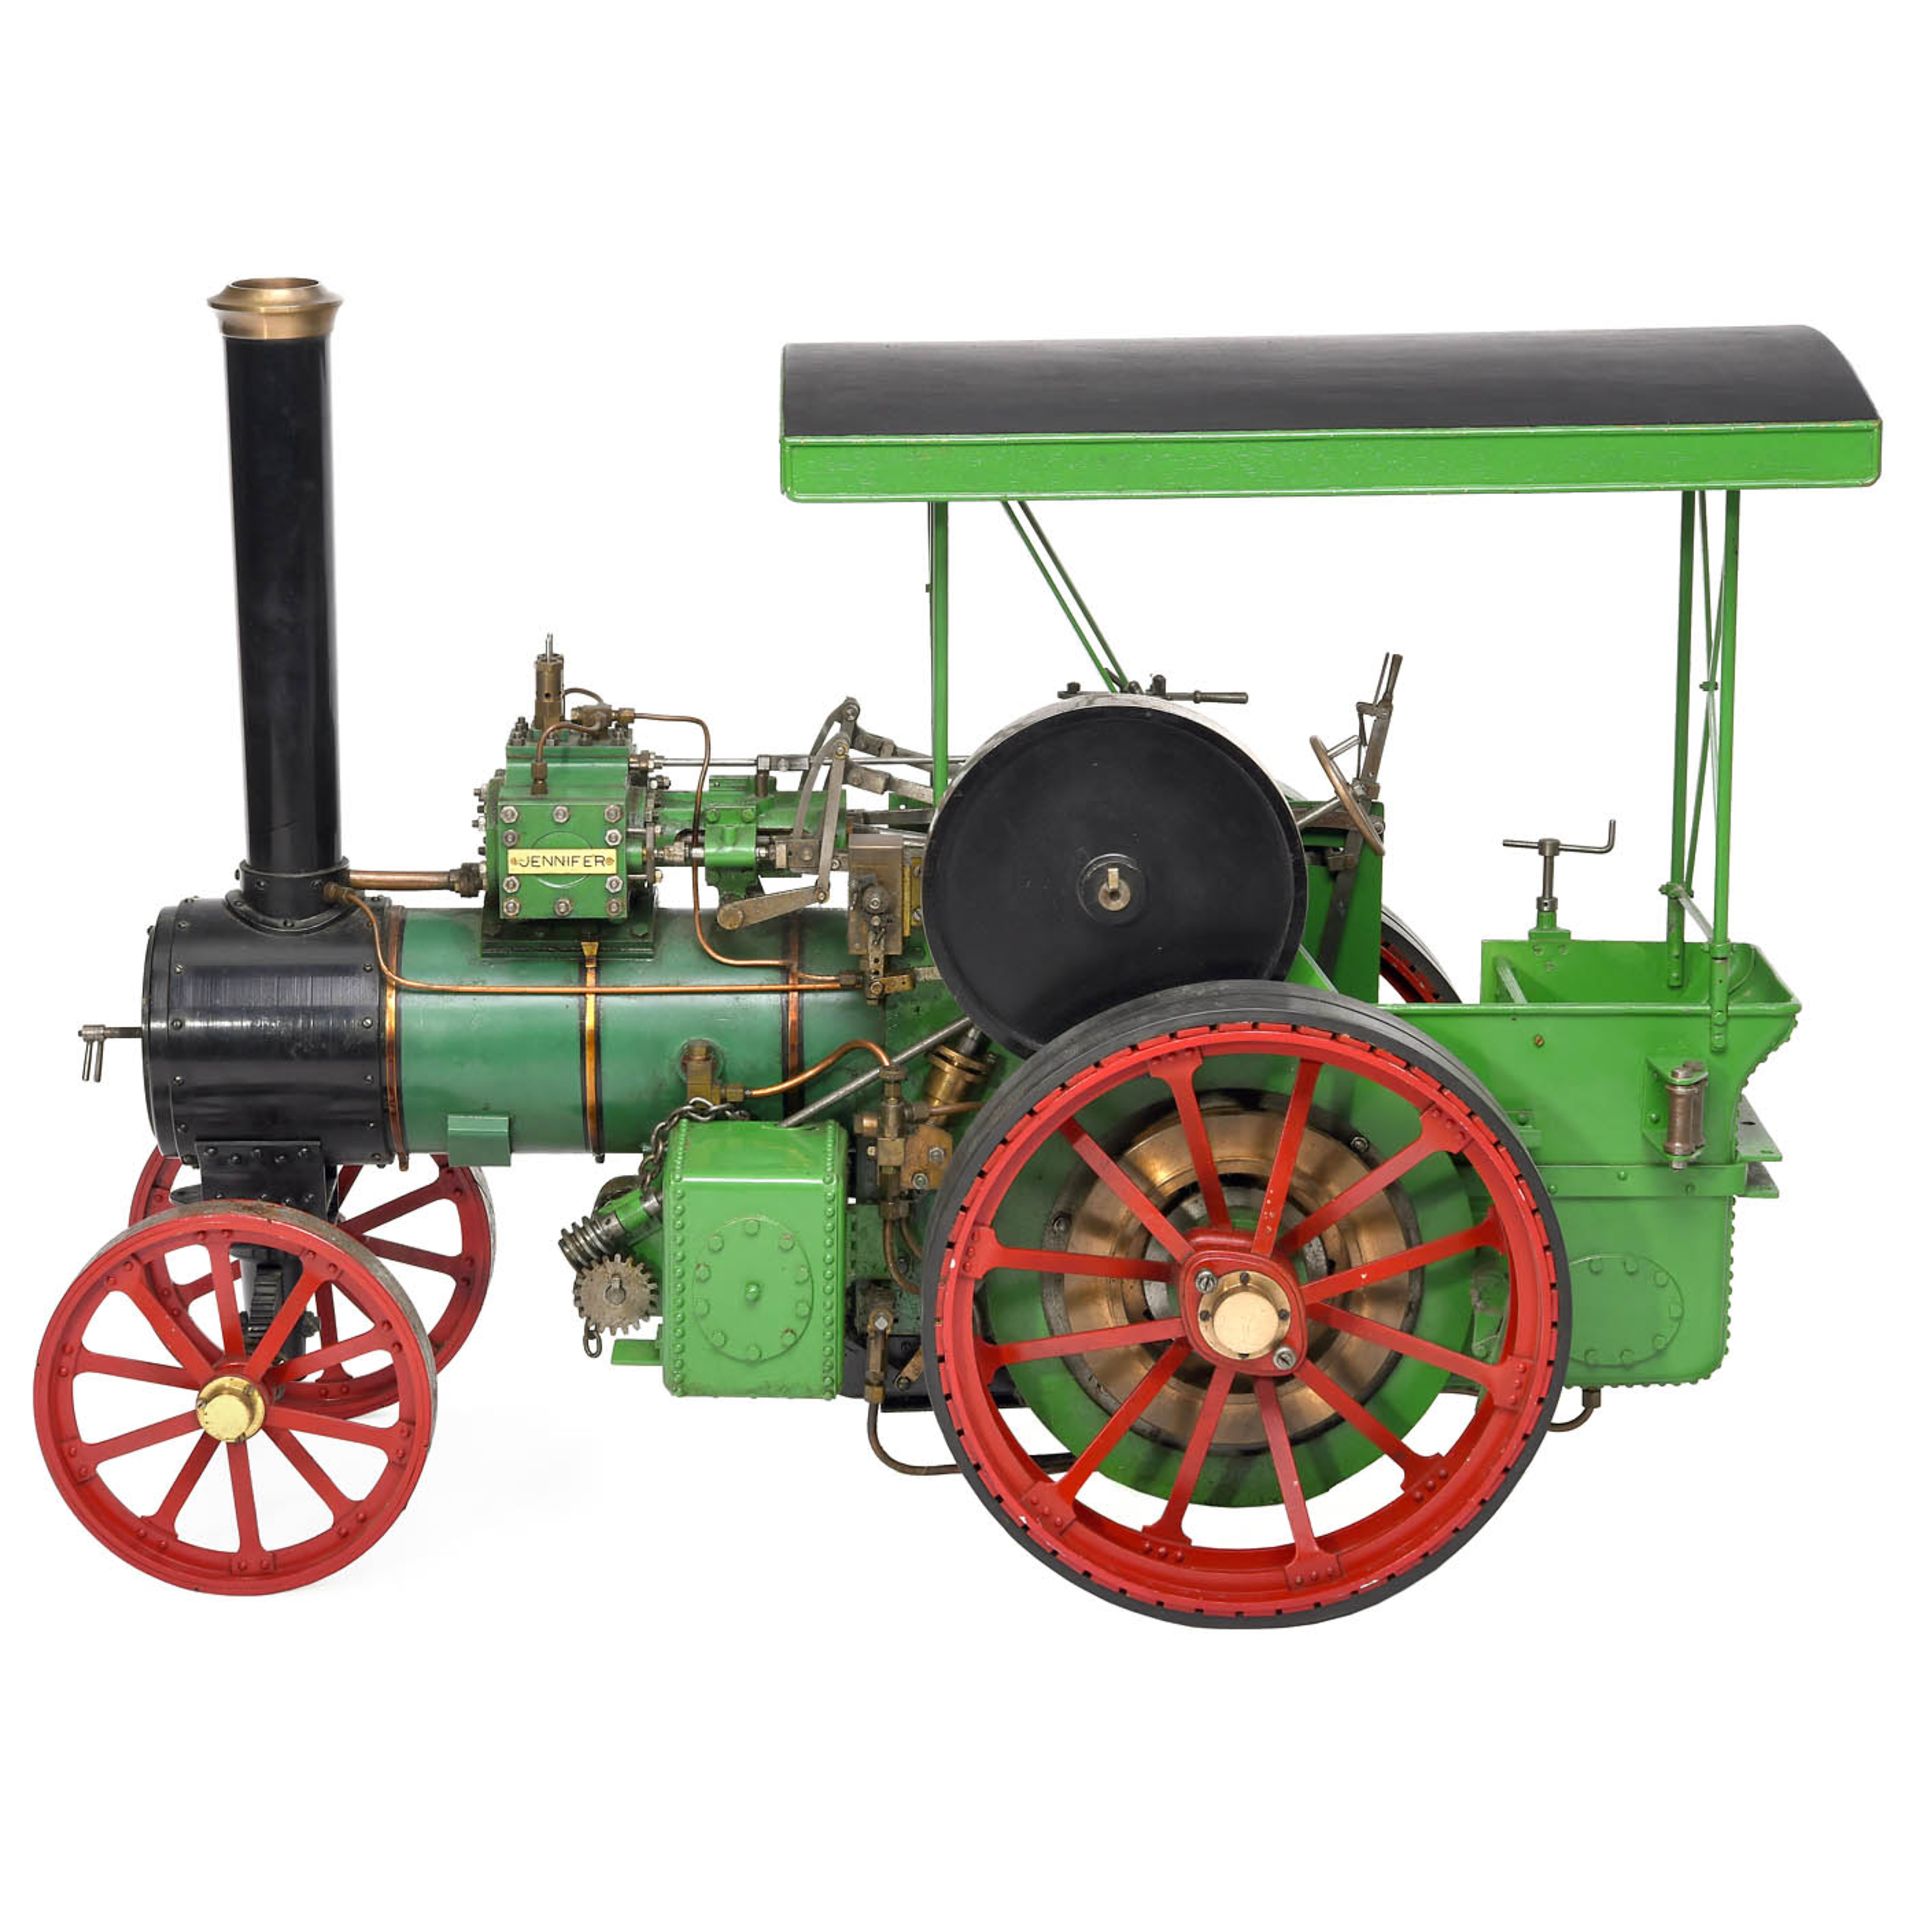 2-inch Scale Model of a Live-Steam Traction Engine "Jenifer", c. 1984 - Image 3 of 10